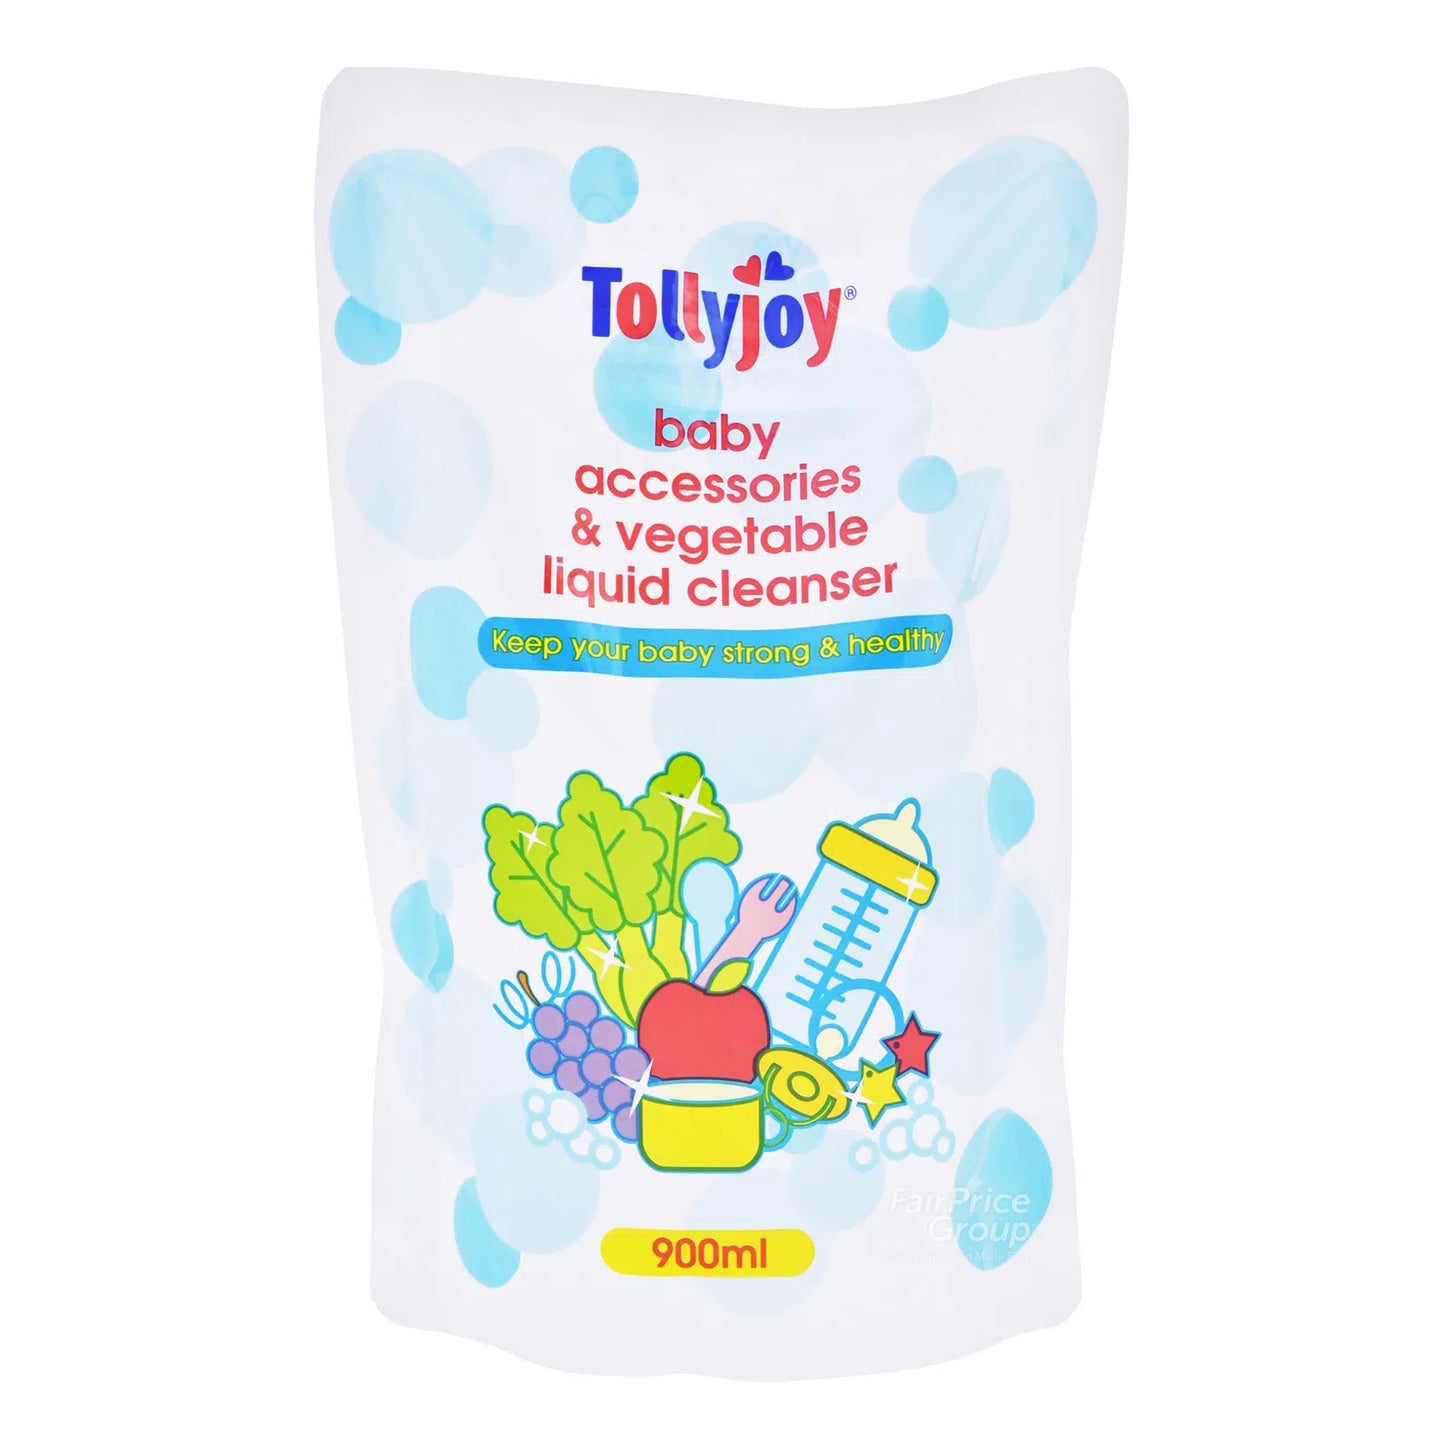 Tollyjoy Baby Accessories & Vegetable Liquid Cleanser